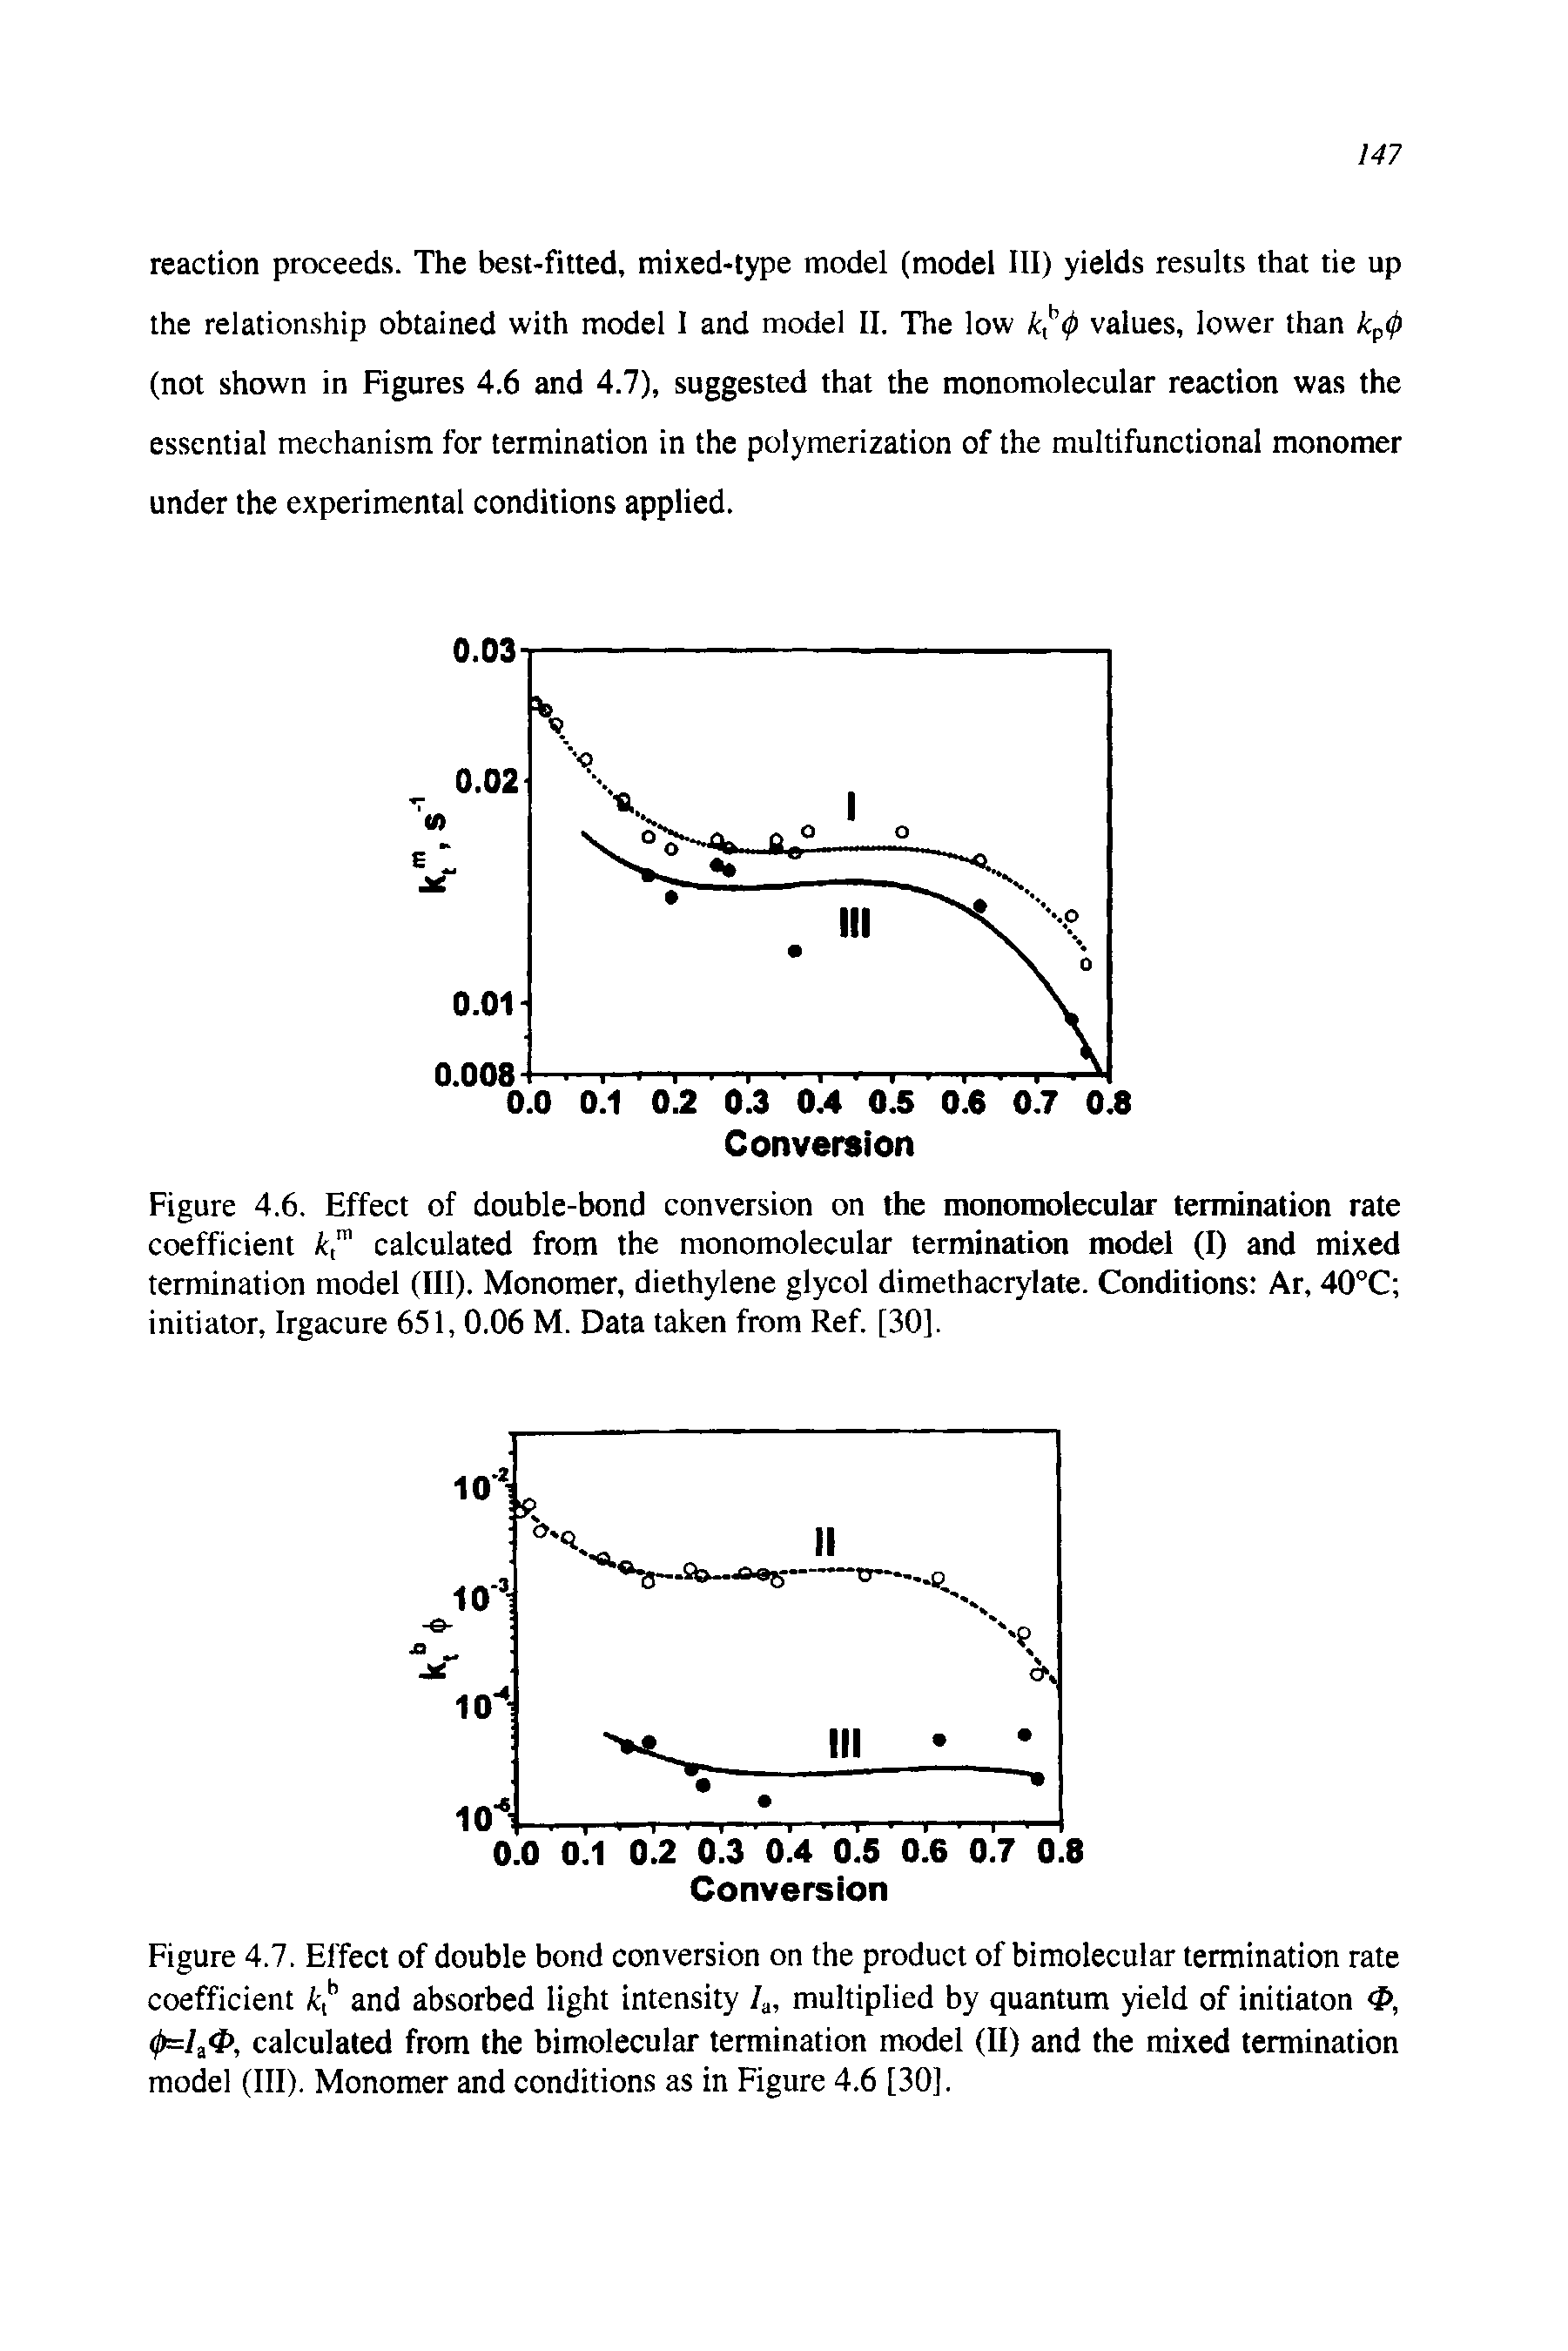 Figure 4.6. Effect of double-bond conversion on the monomolecular termination rate coefficient calculated from the monomolecular termination model (1) and mixed termination model (III). Monomer, diethylene glycol dimethacrylate. Conditions Ar, 40°C initiator, Irgacure 651,0.06 M. Data taken from Ref. [30].